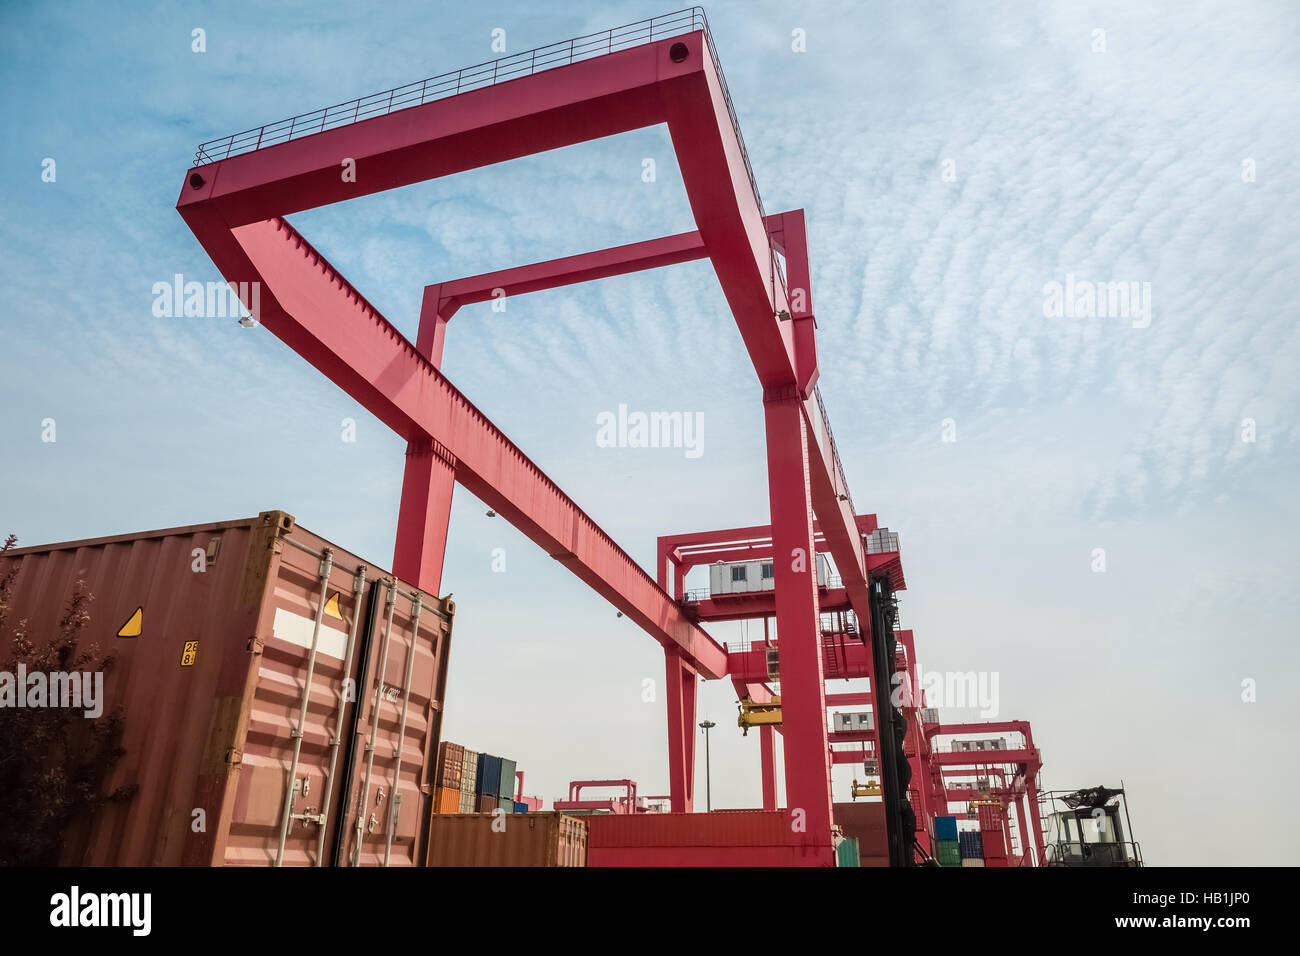 container freight yard Stock Photo